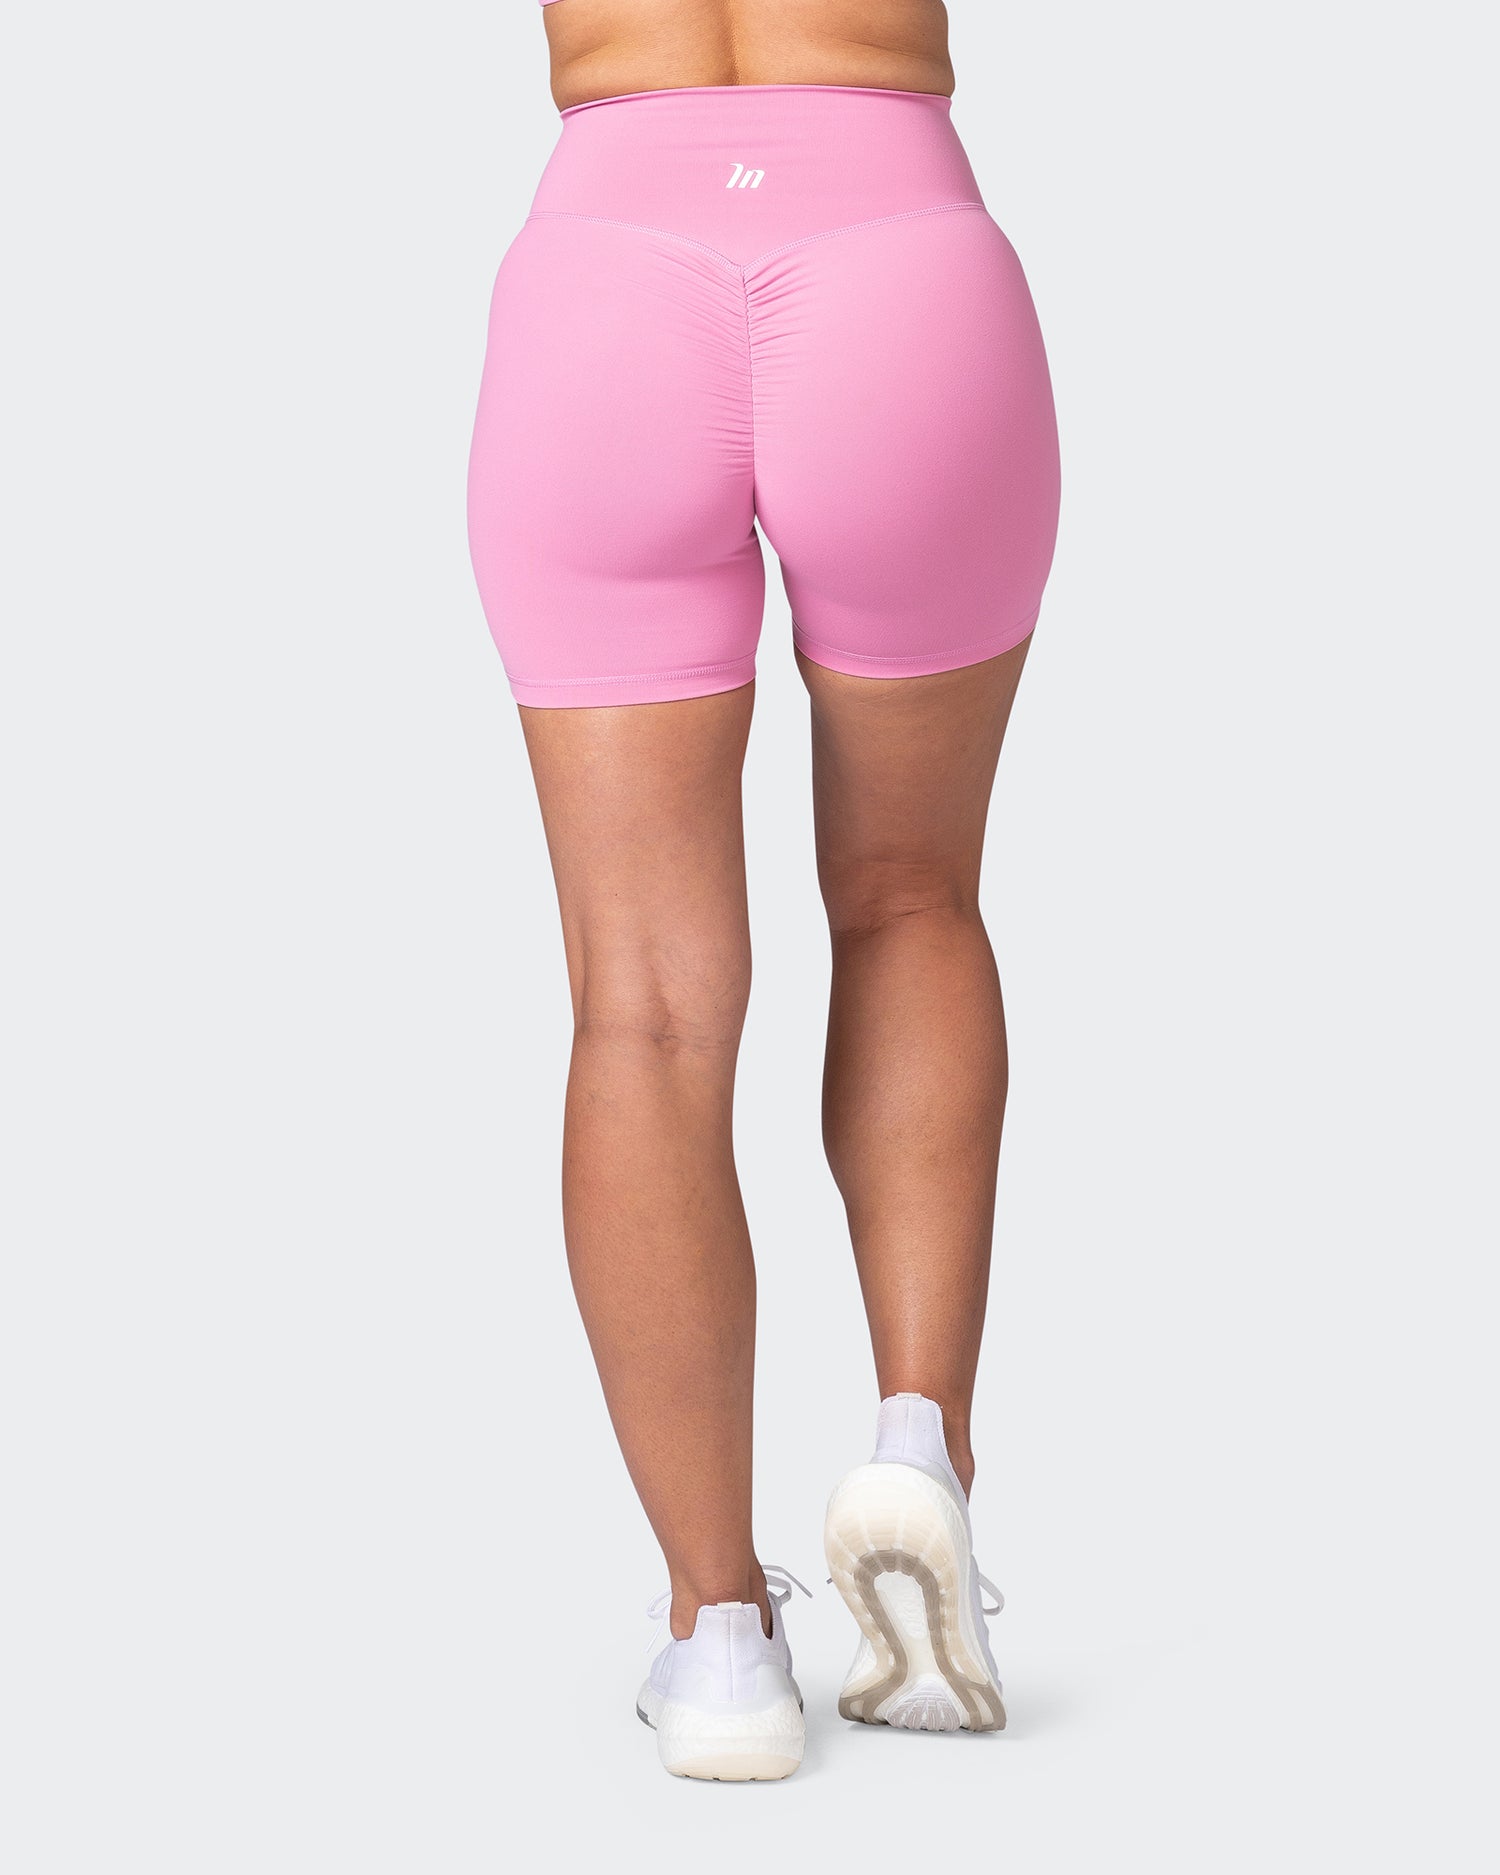 Breakpoint Scrunch Bike Shorts - Candy Pink - Muscle Nation